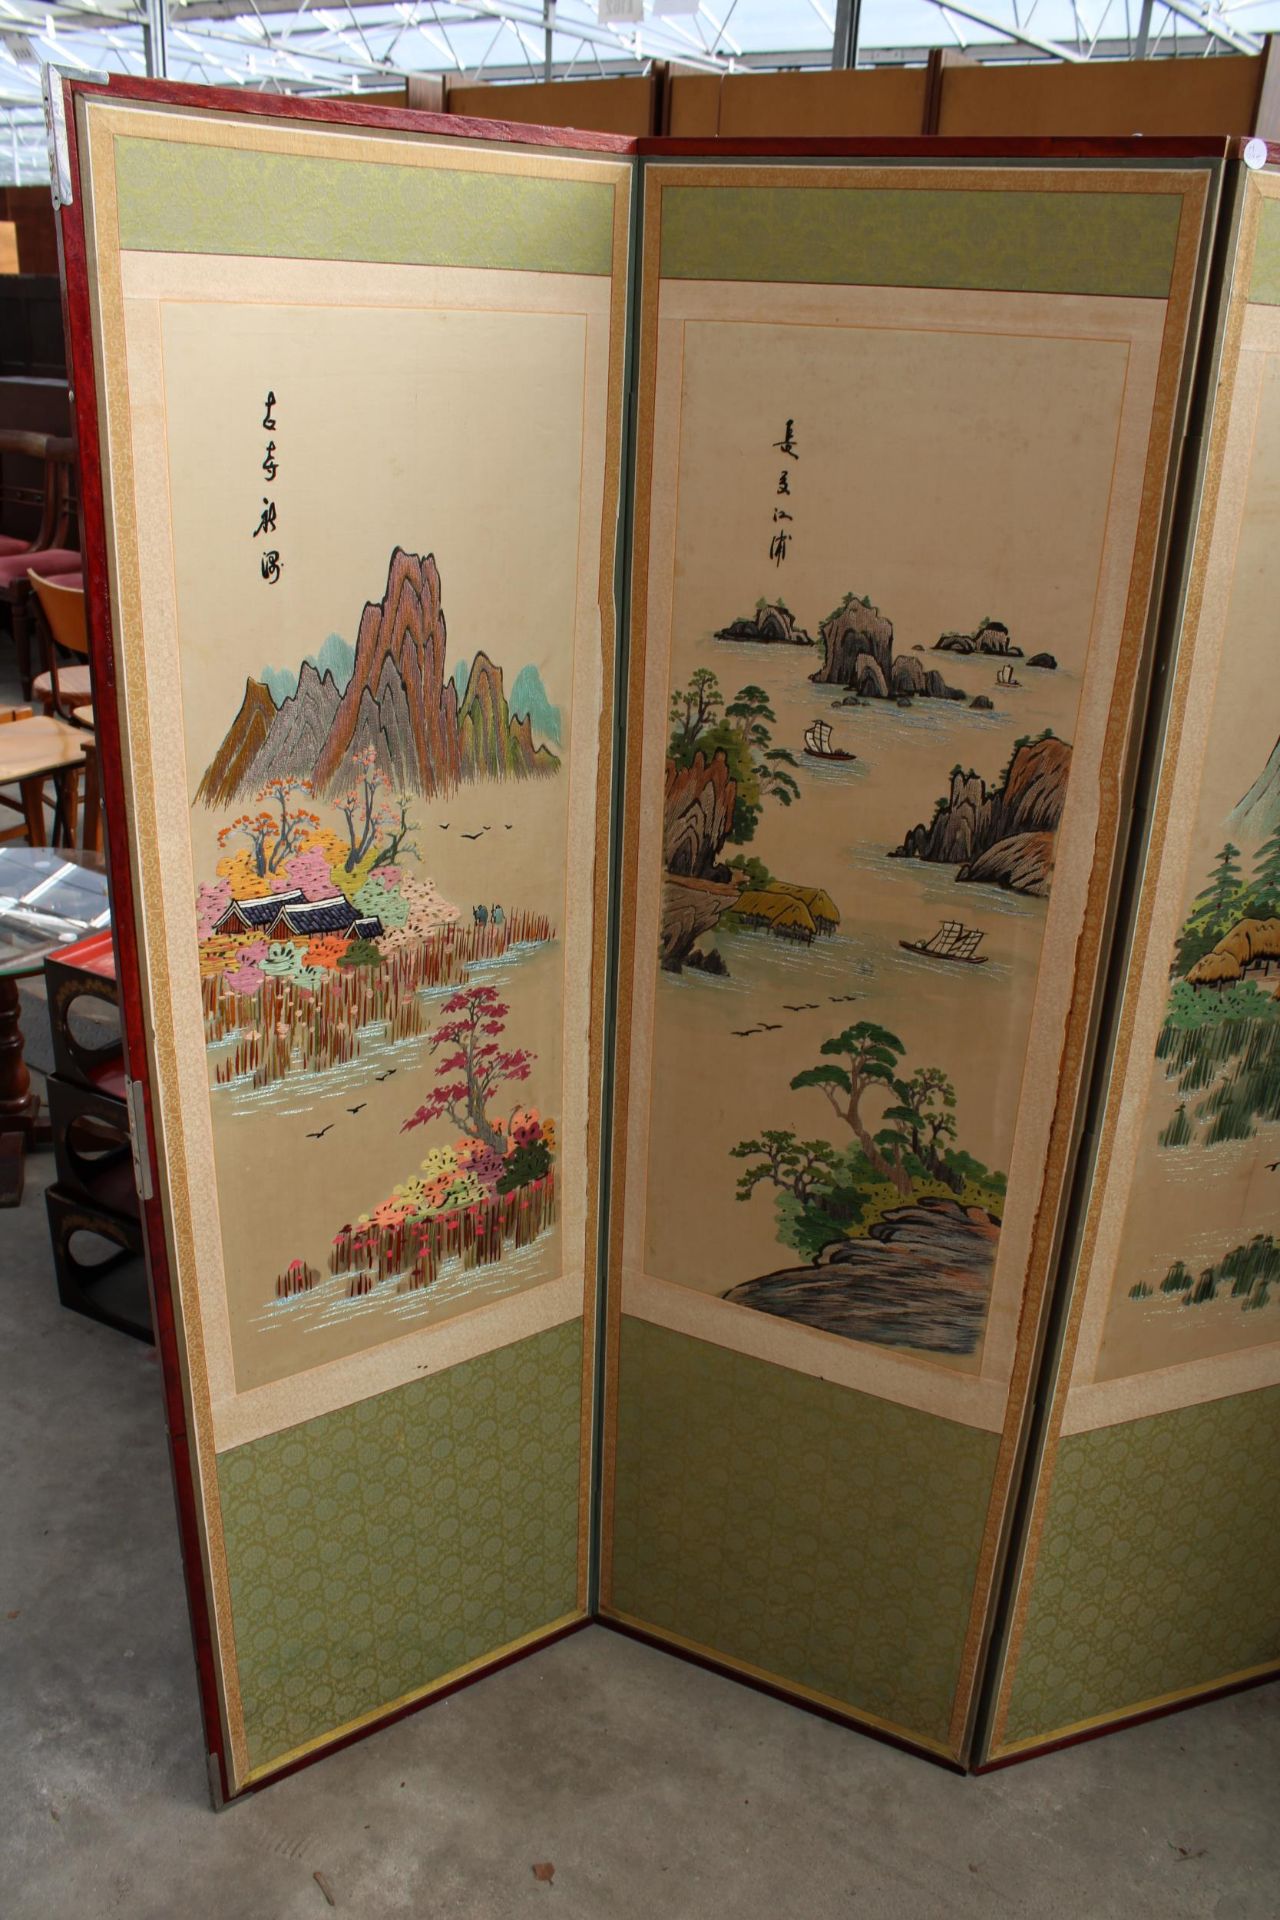 AN ORIENTAL SIX DIVISION SCREEN WITH TAPESTRY AND SILK MOUNTAIN SCENES EACH SECTION IS 60" X 18" - Image 2 of 8